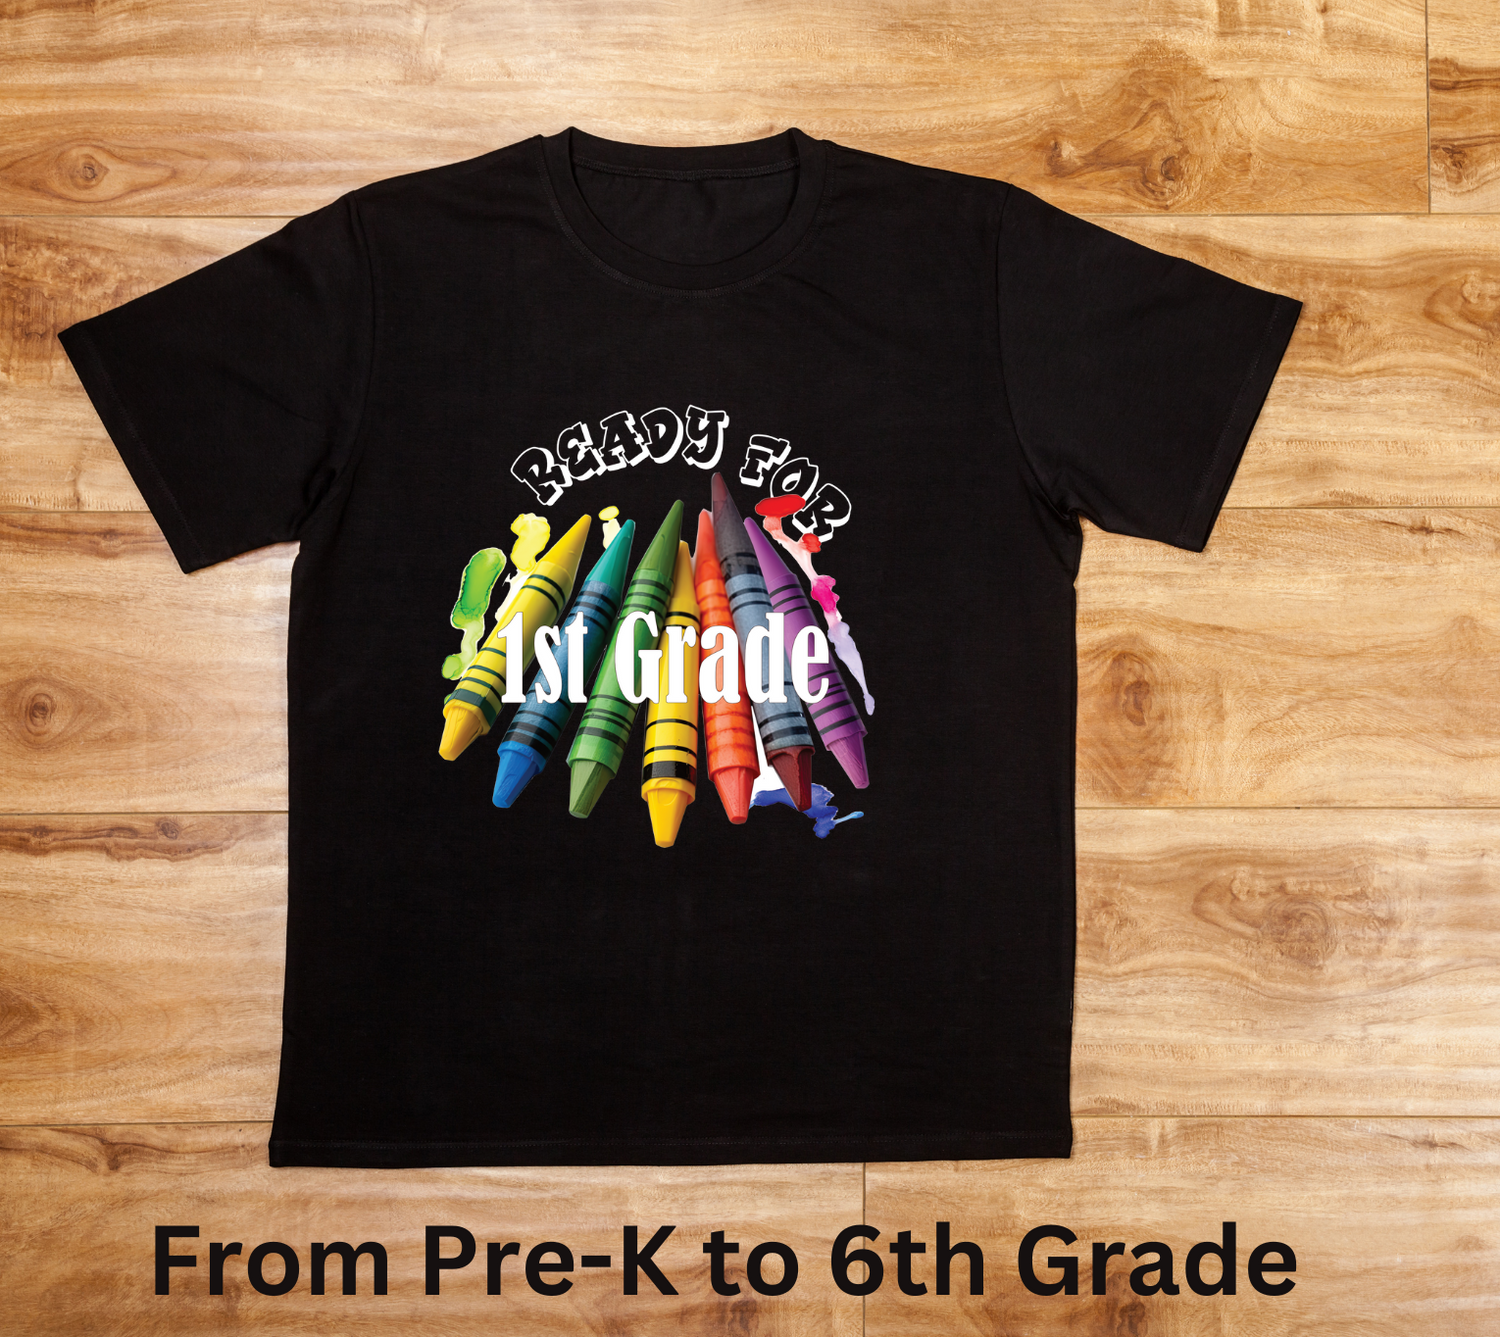 Black shirt with bright crayons. Ready for Pre-School to 6th grade option available